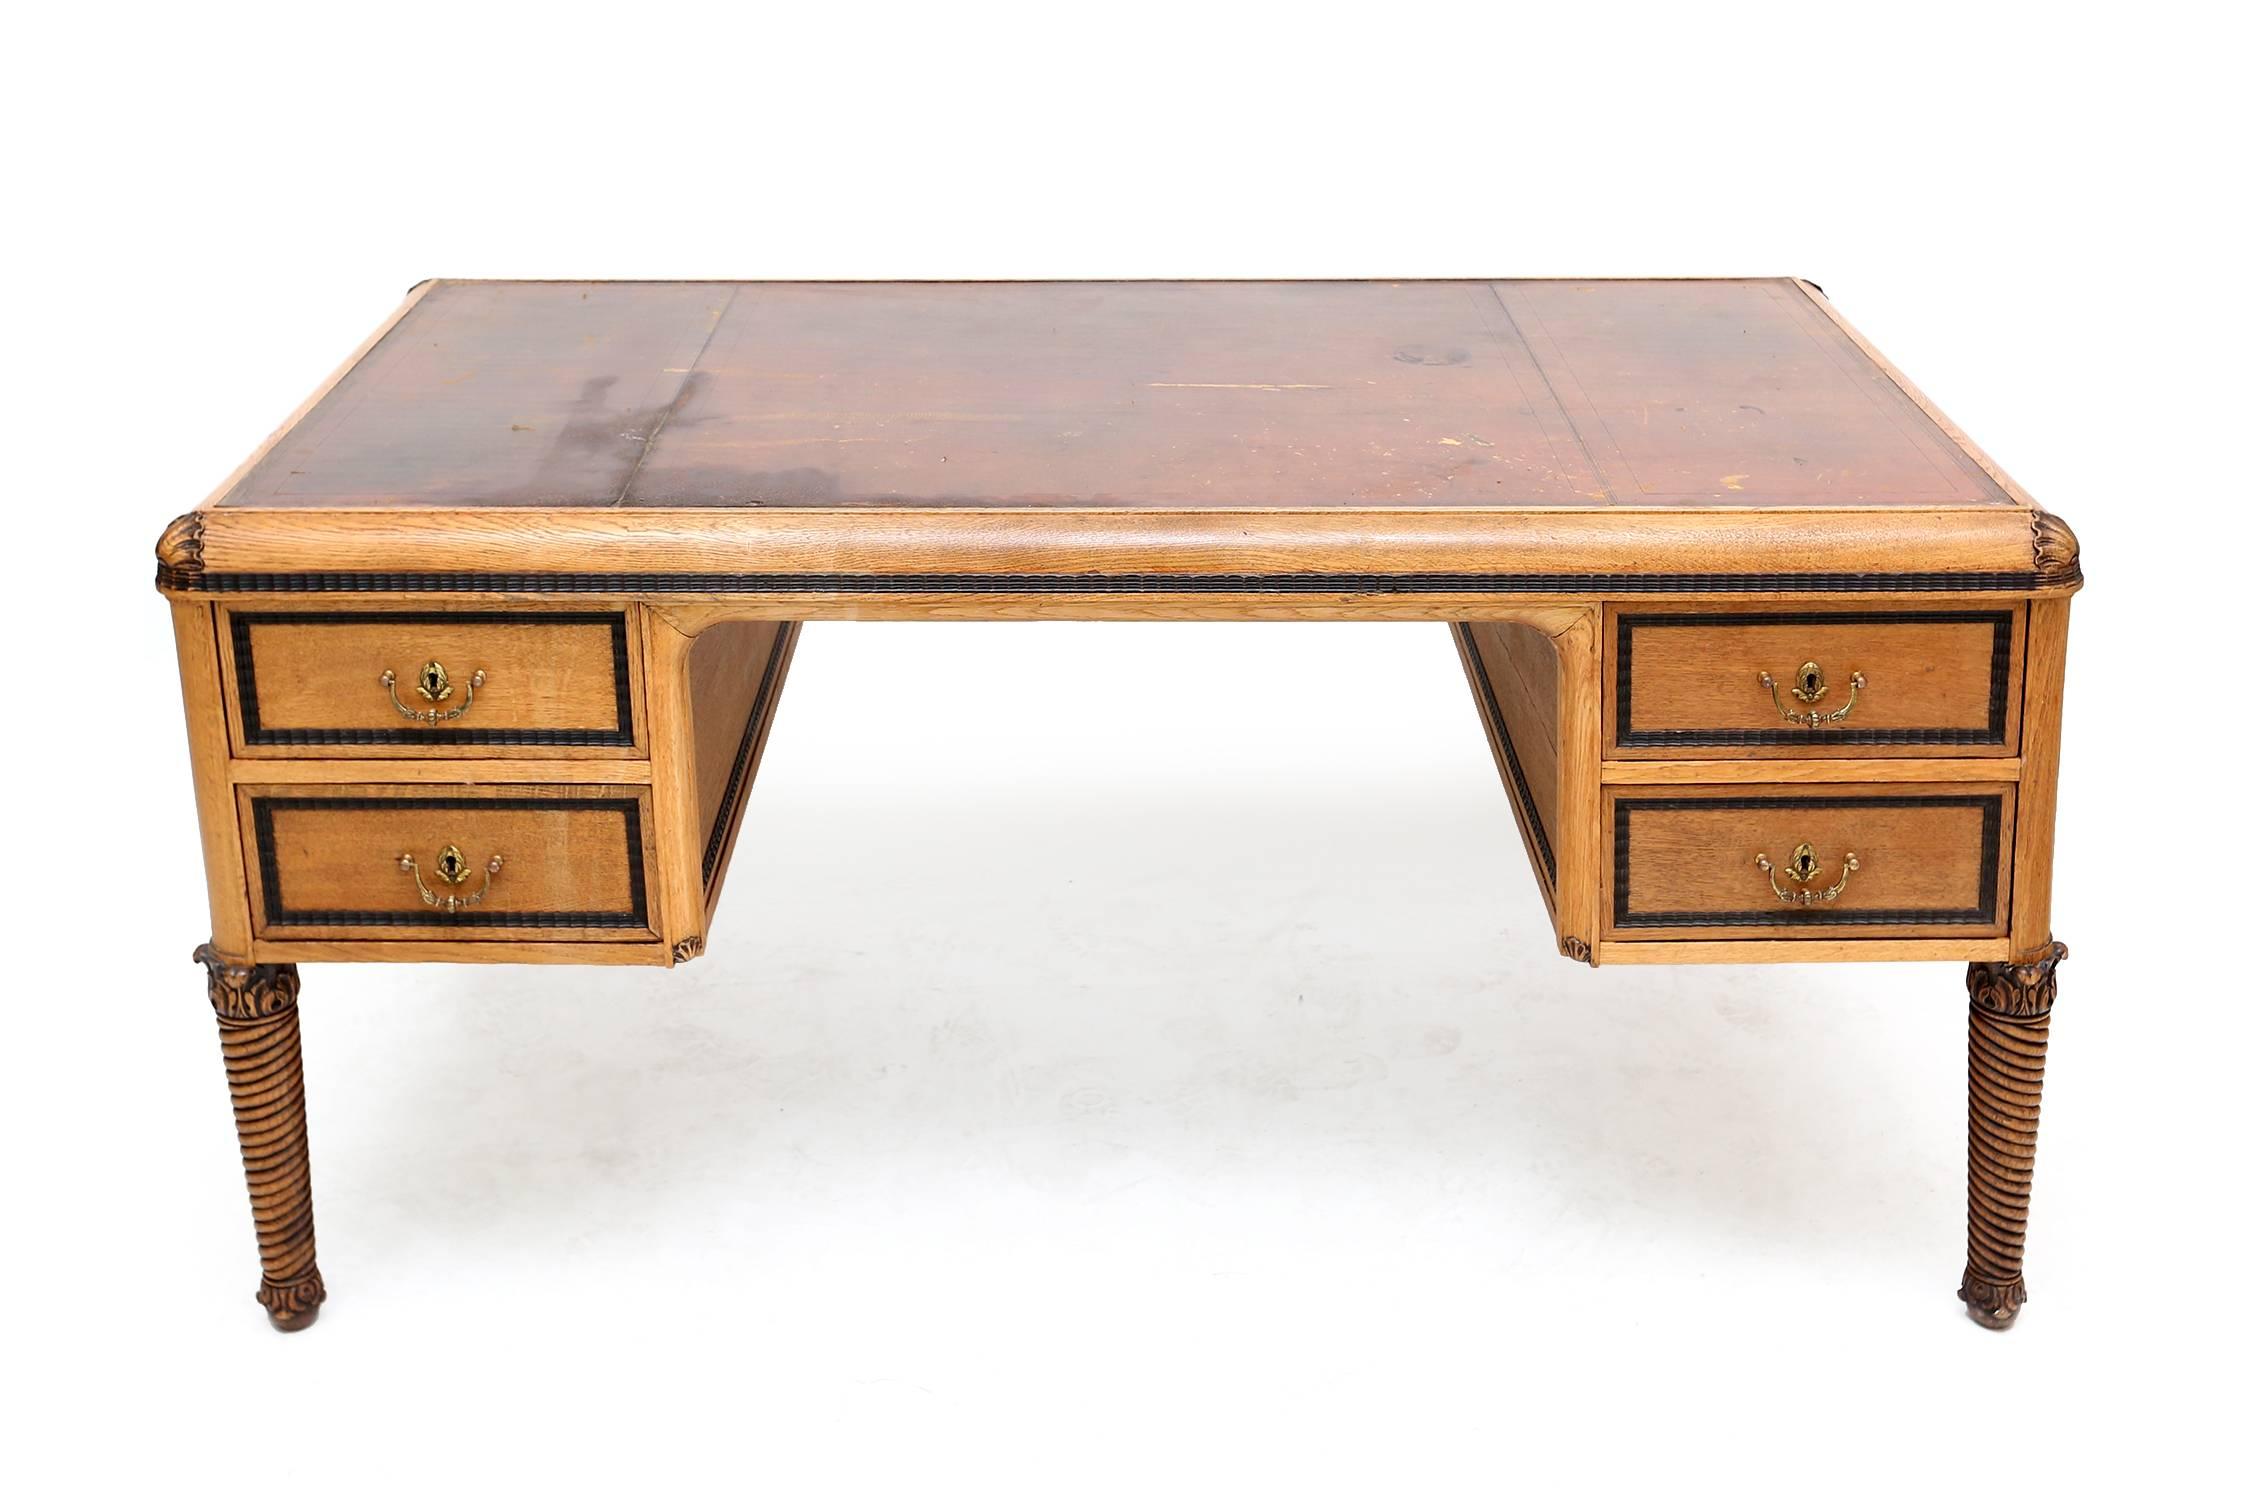 Awesome desk by Maison Franck
in very good condition ¬ some wear on the leather top
stunning turned legs with acanthus leafs
the desk looks exactly the same from each side,
Belgium, circa 1920.
 